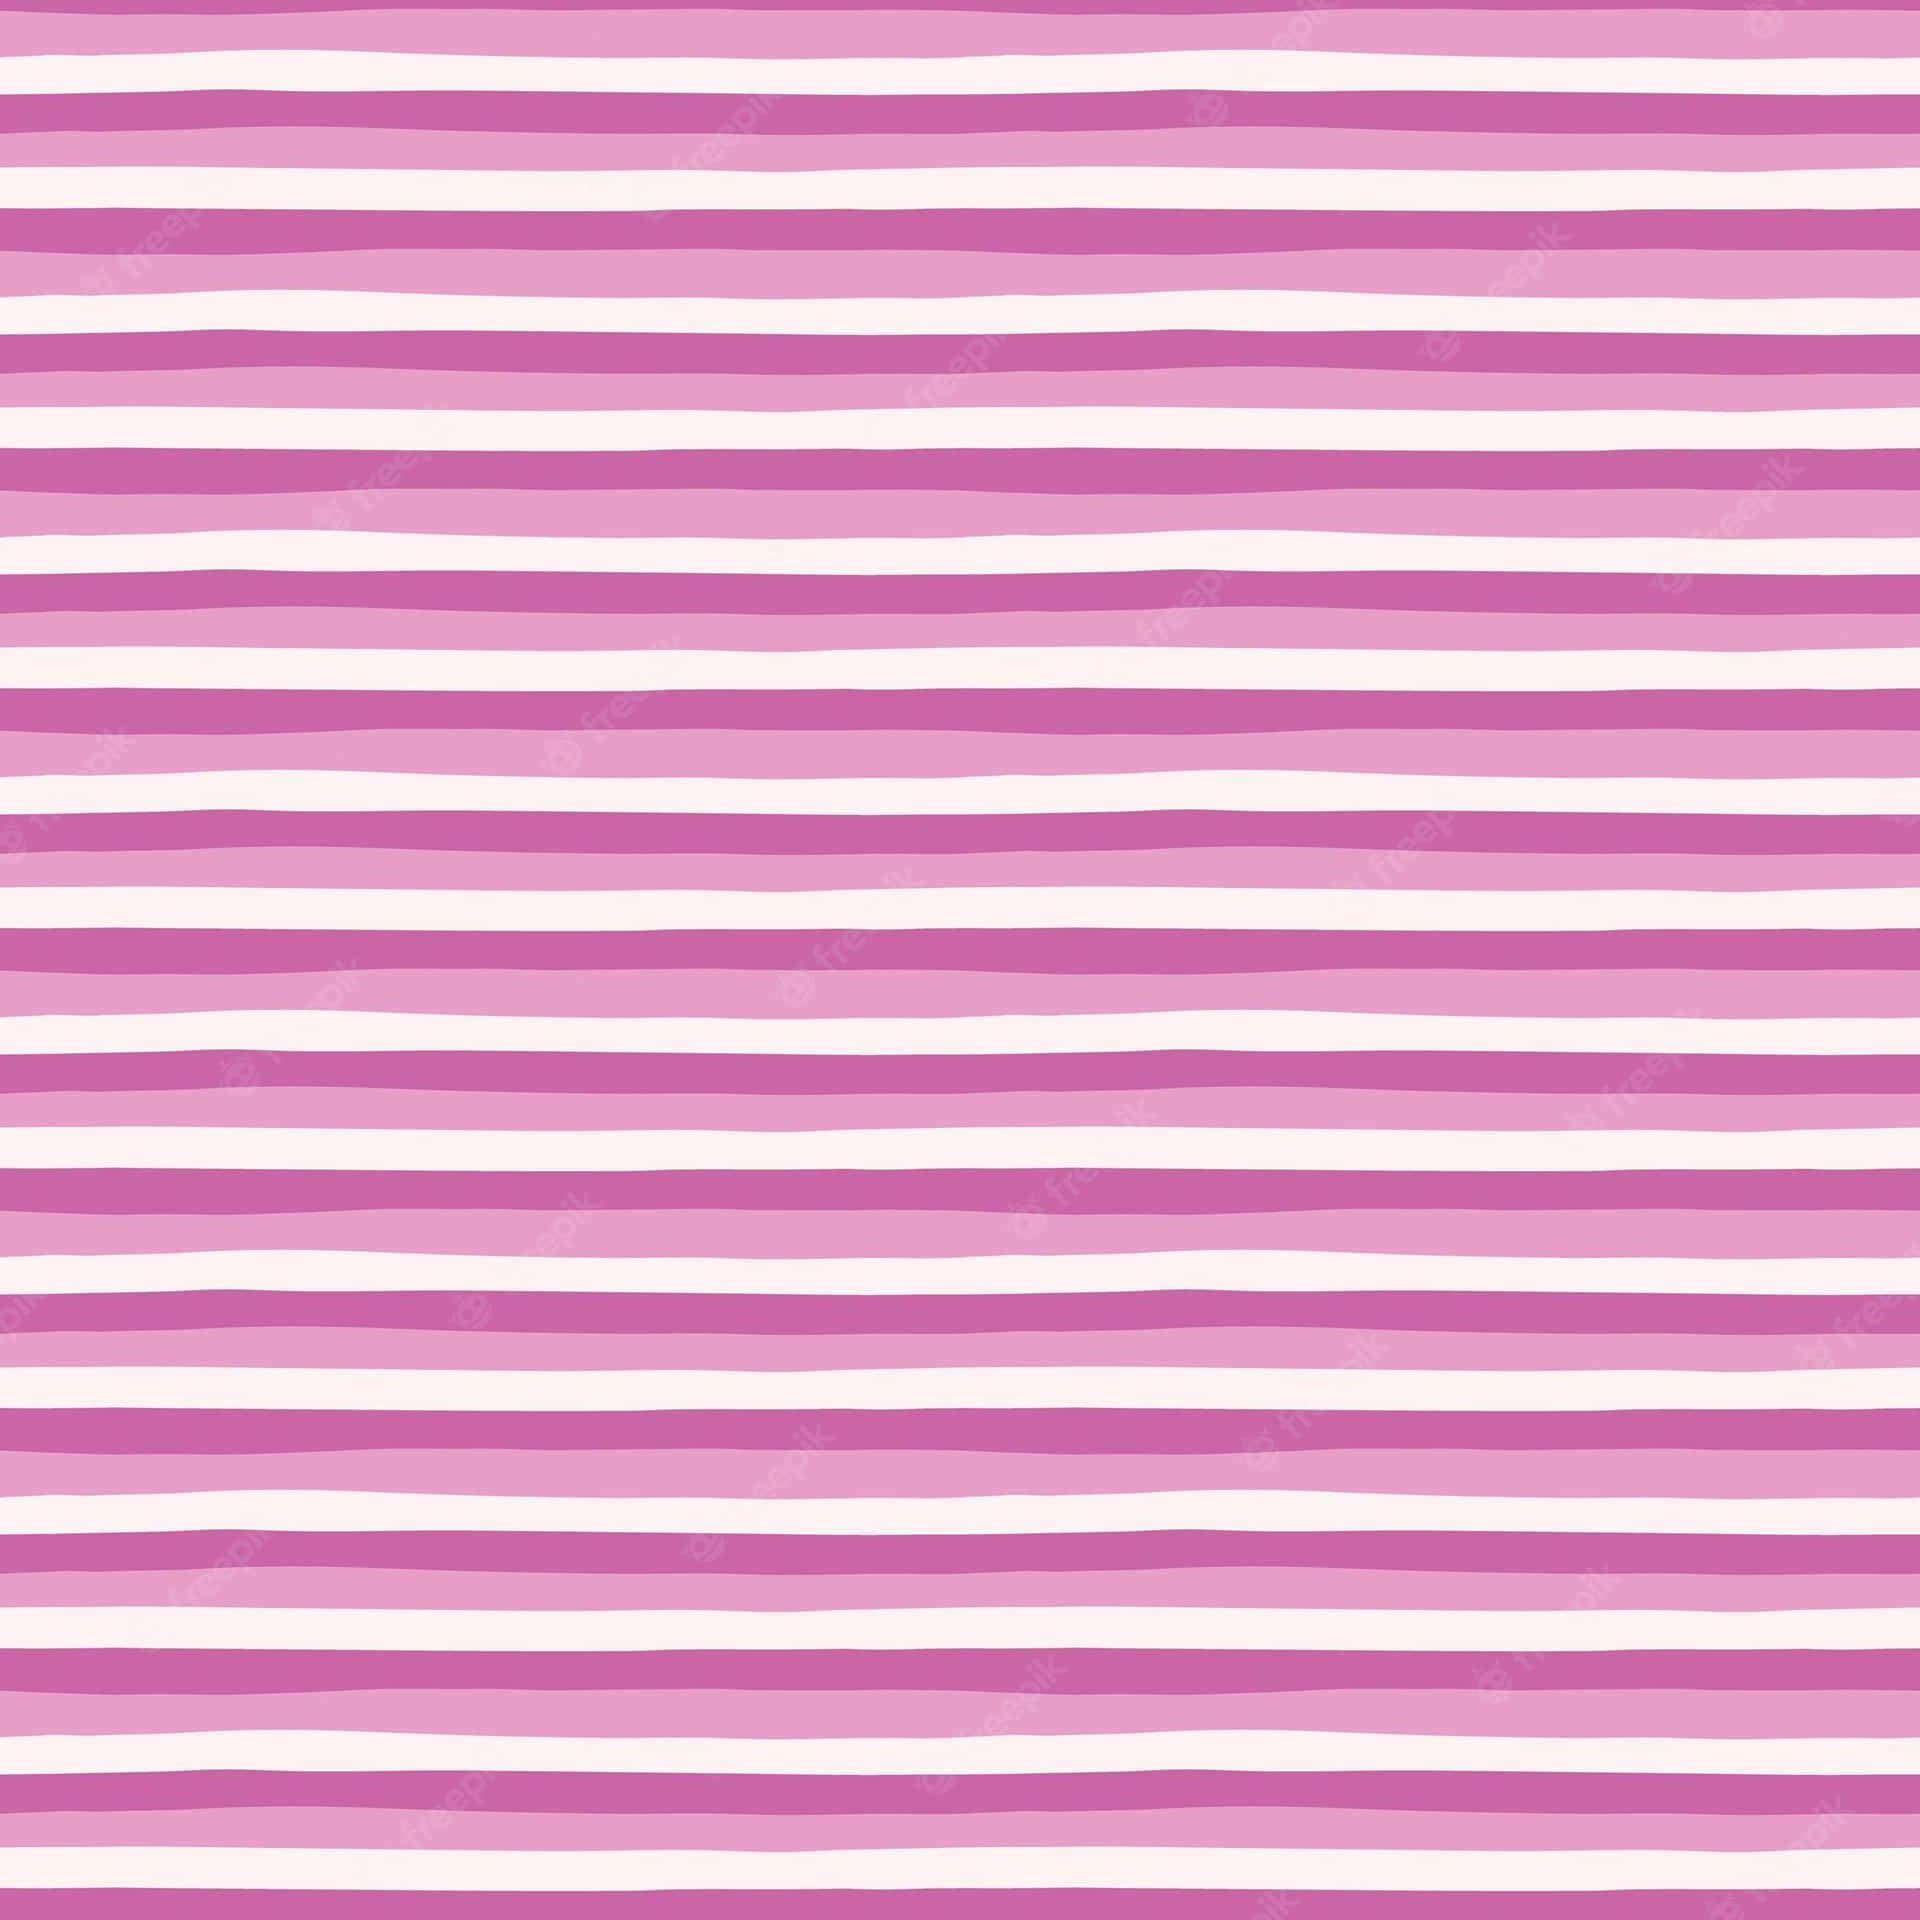 Enjoy a Blissful View with Pastel Striped Wallpaper